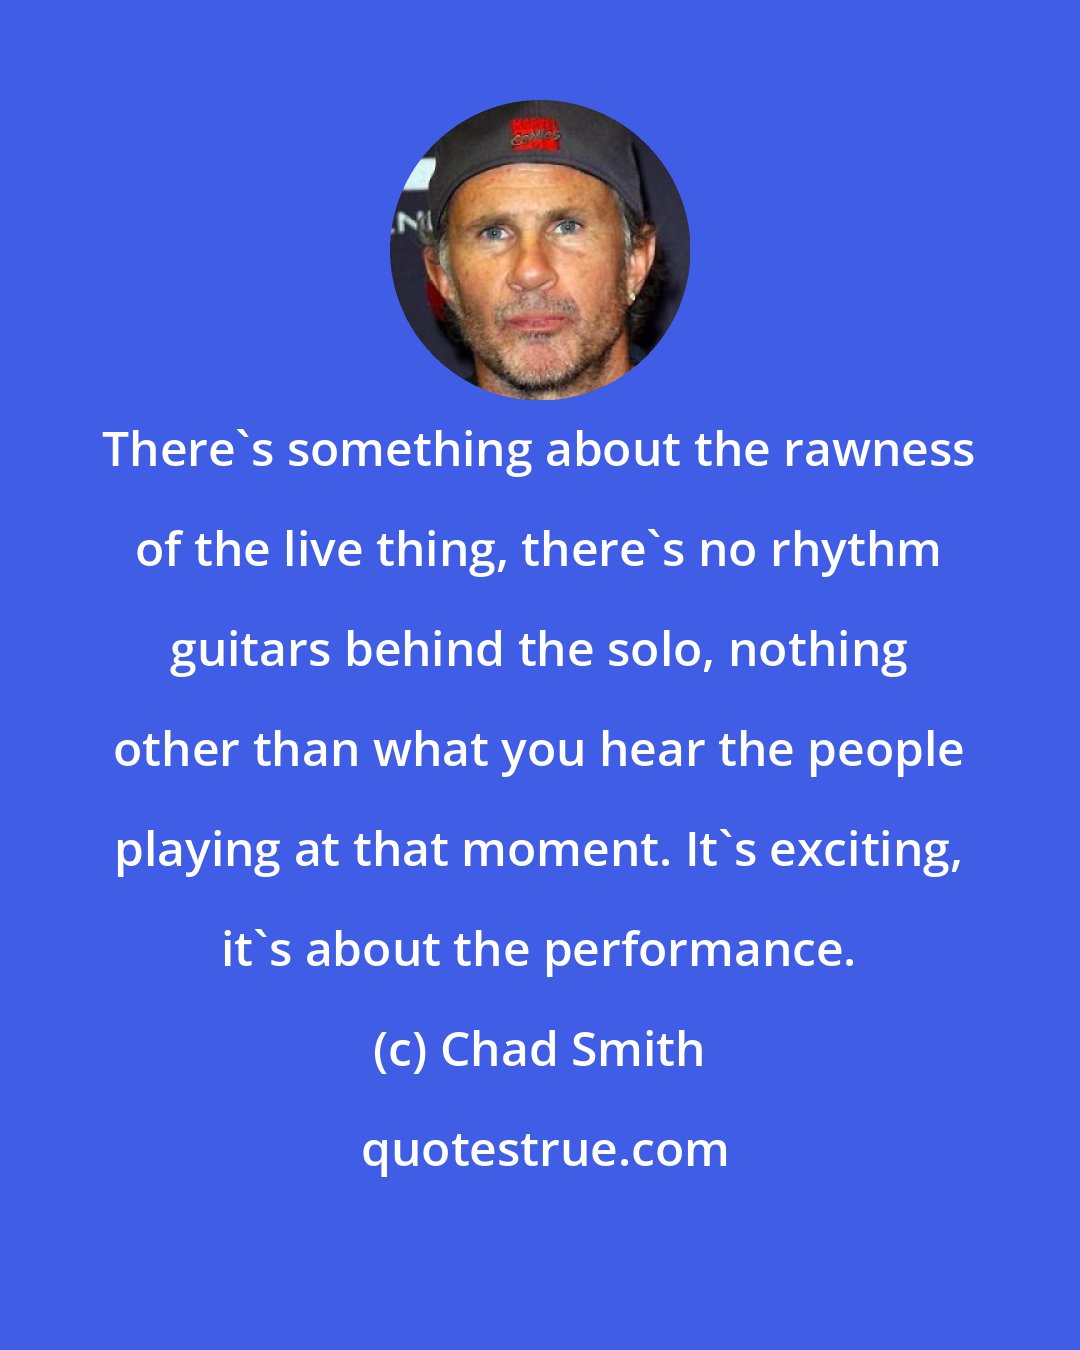 Chad Smith: There's something about the rawness of the live thing, there's no rhythm guitars behind the solo, nothing other than what you hear the people playing at that moment. It's exciting, it's about the performance.